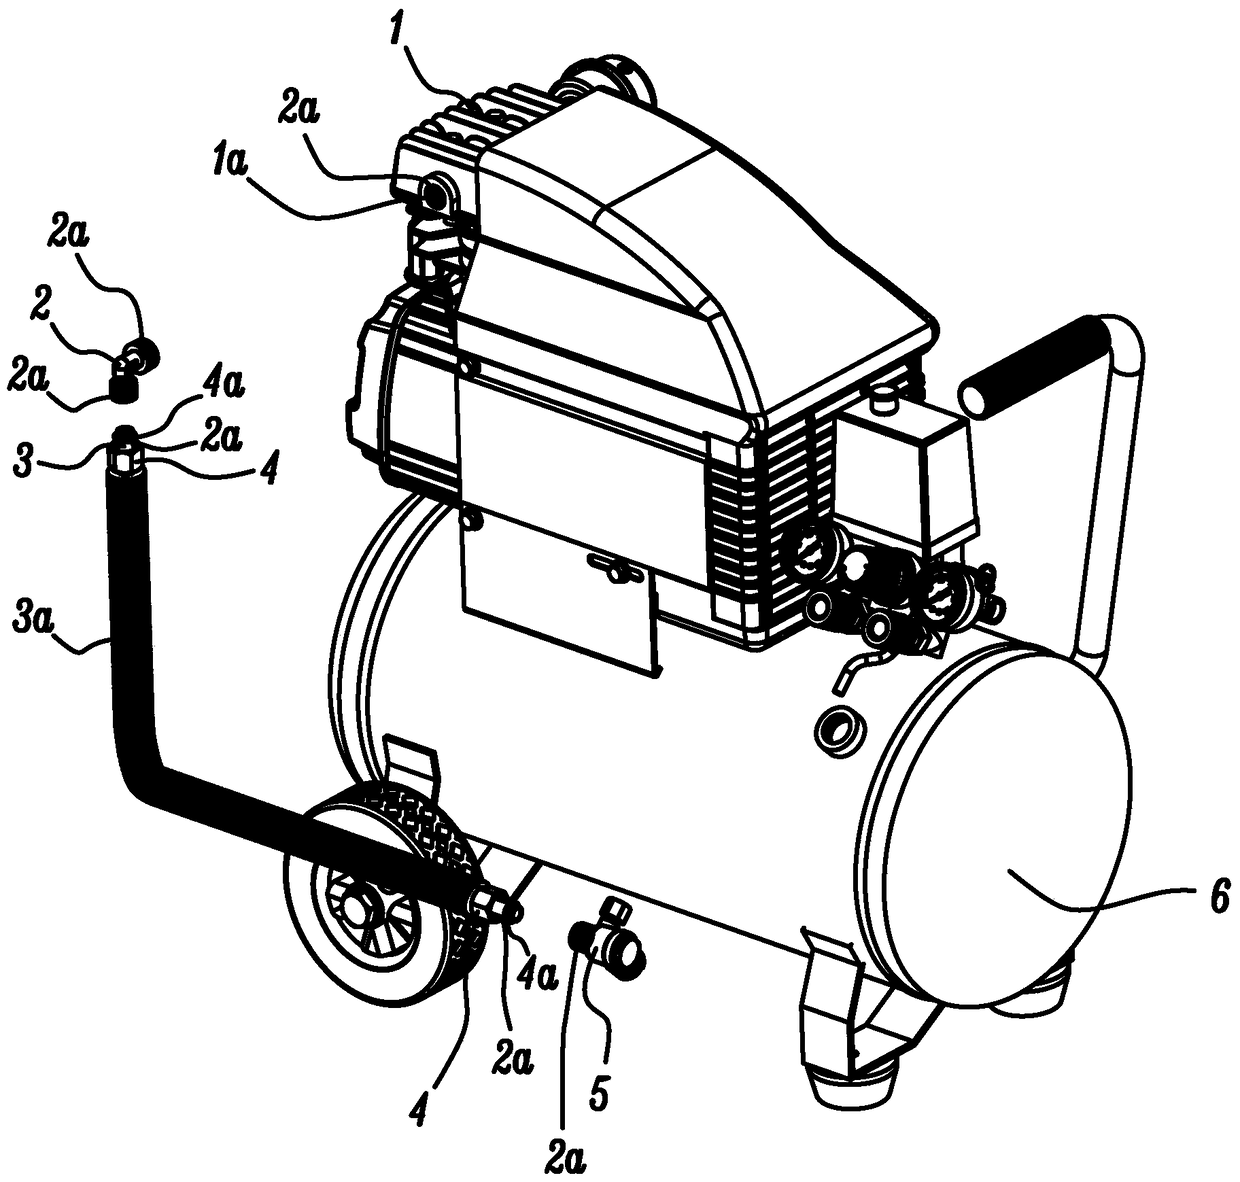 A thread-free connection structure and layout of an air compressor exhaust pipe